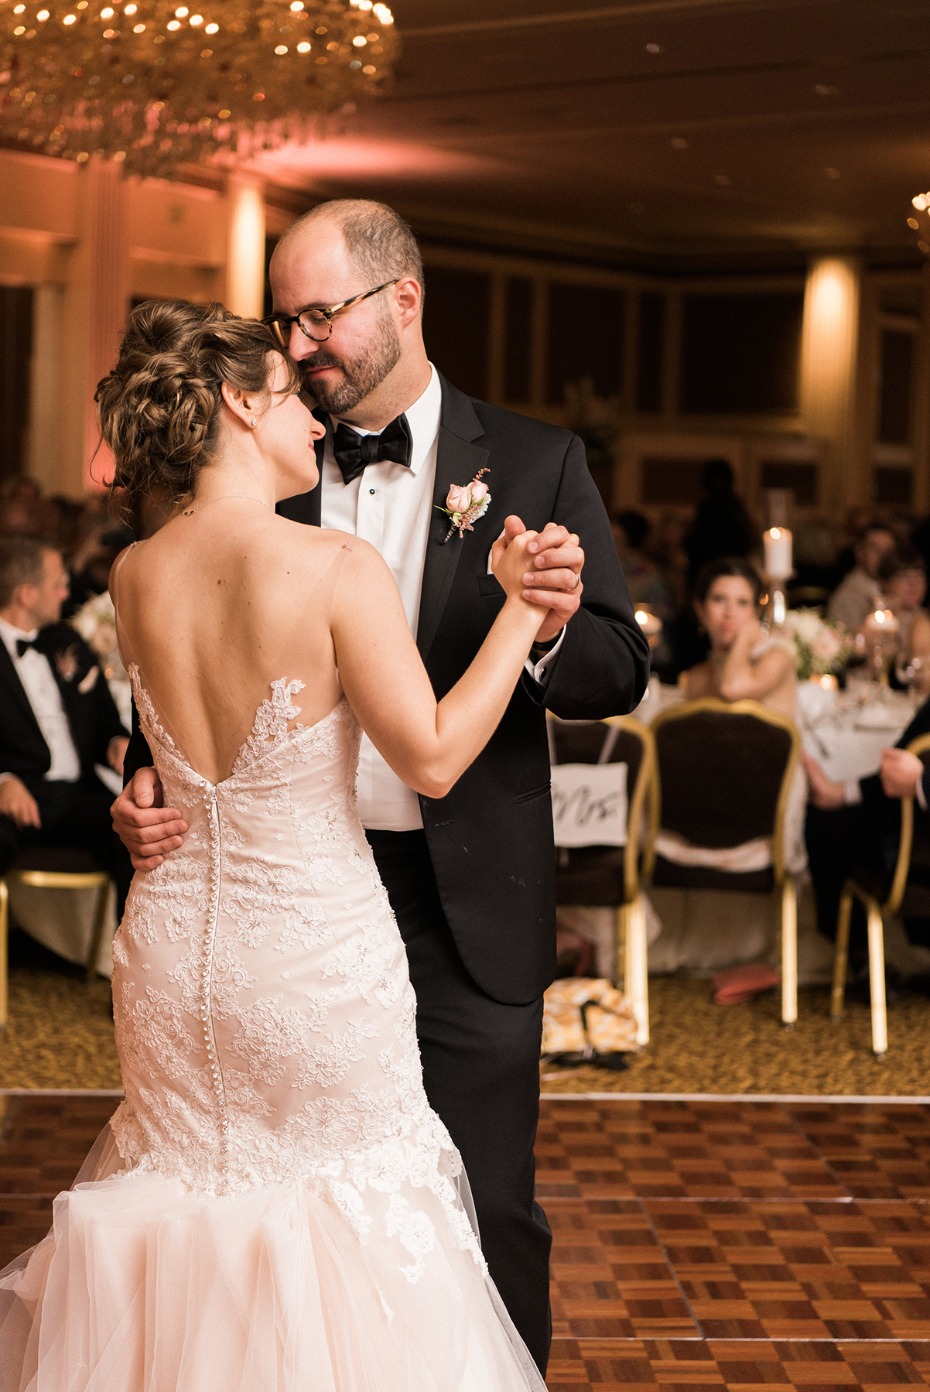 First dance for this formal black tie wedding